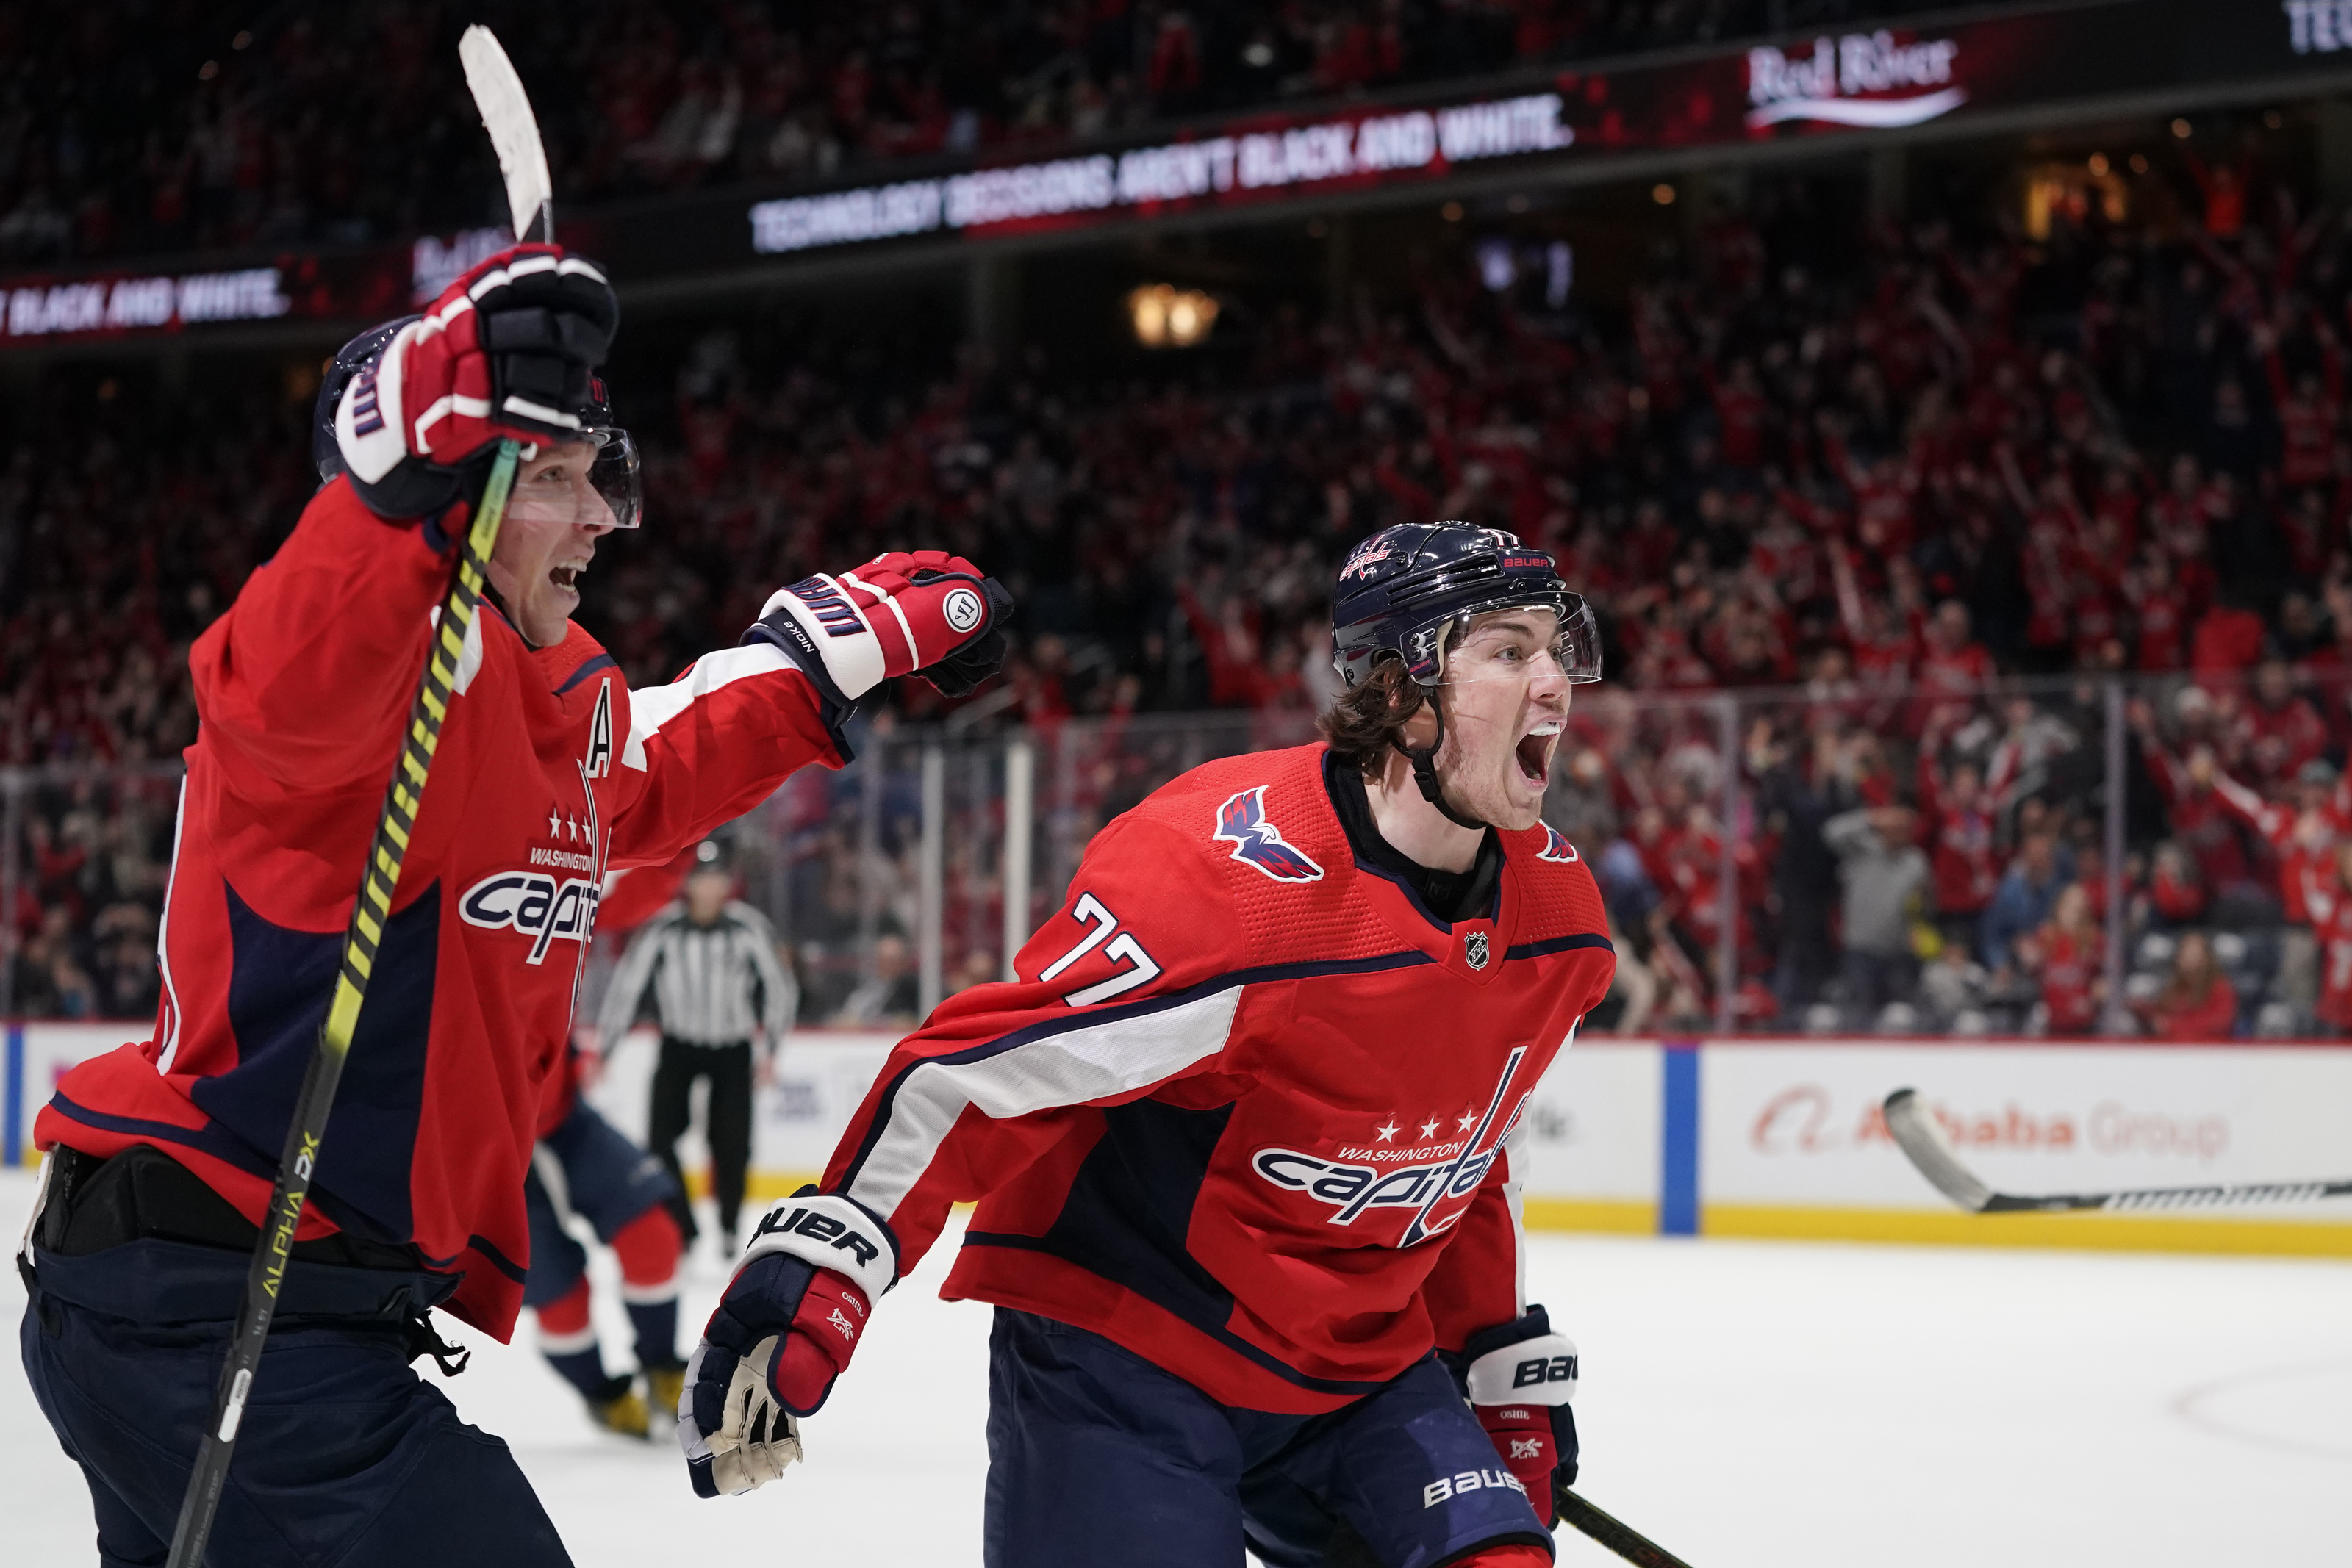 T.J. Oshie's popularity keeps growing